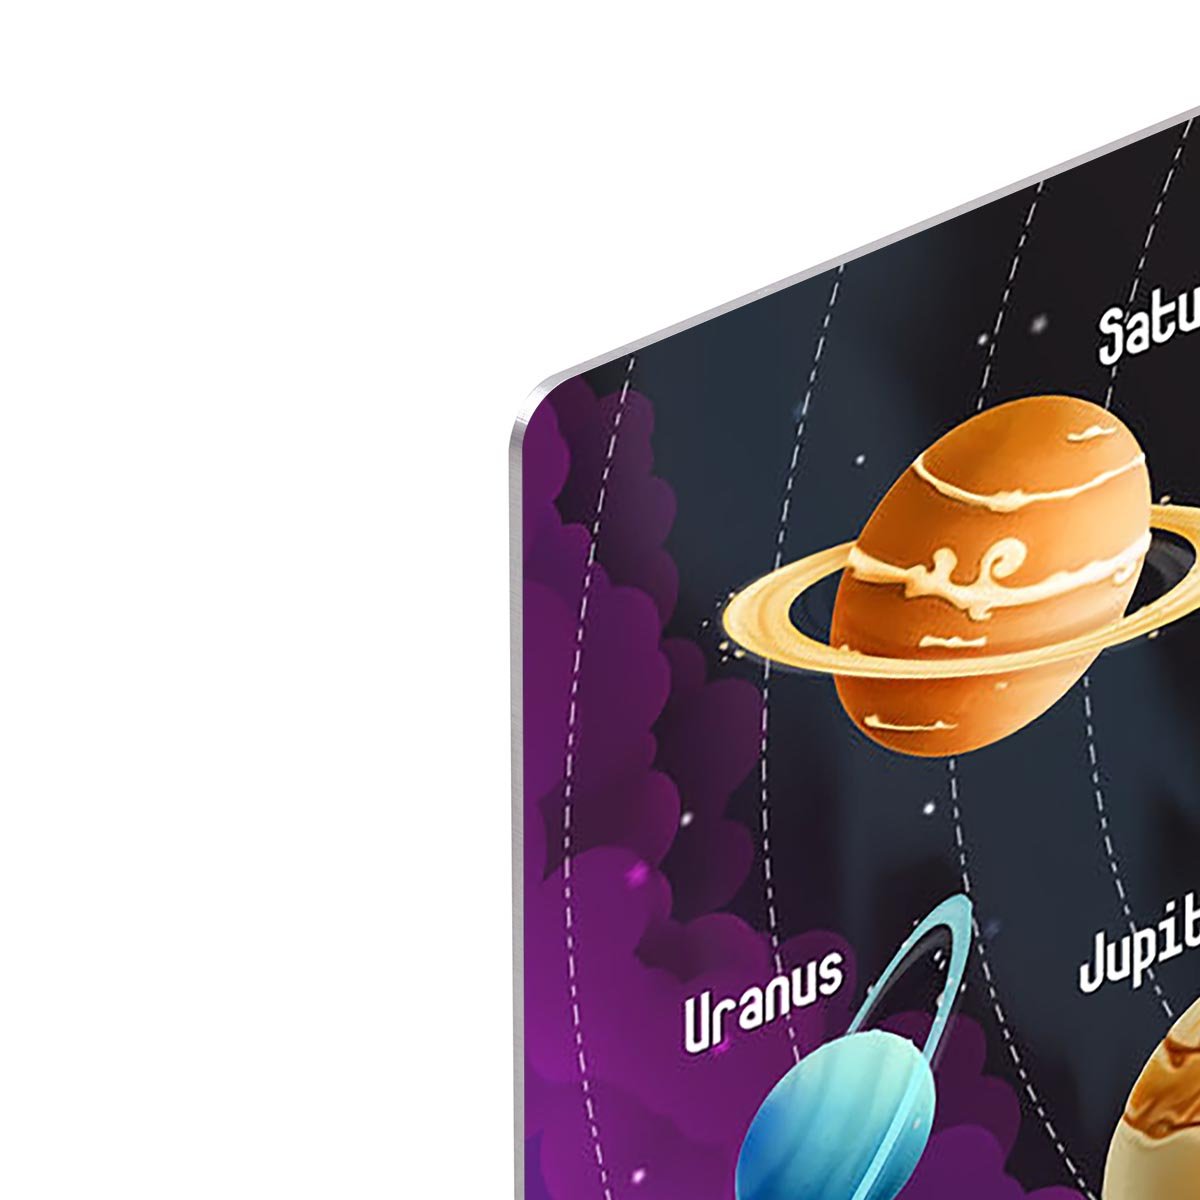 Solar system of planets HD Metal Print